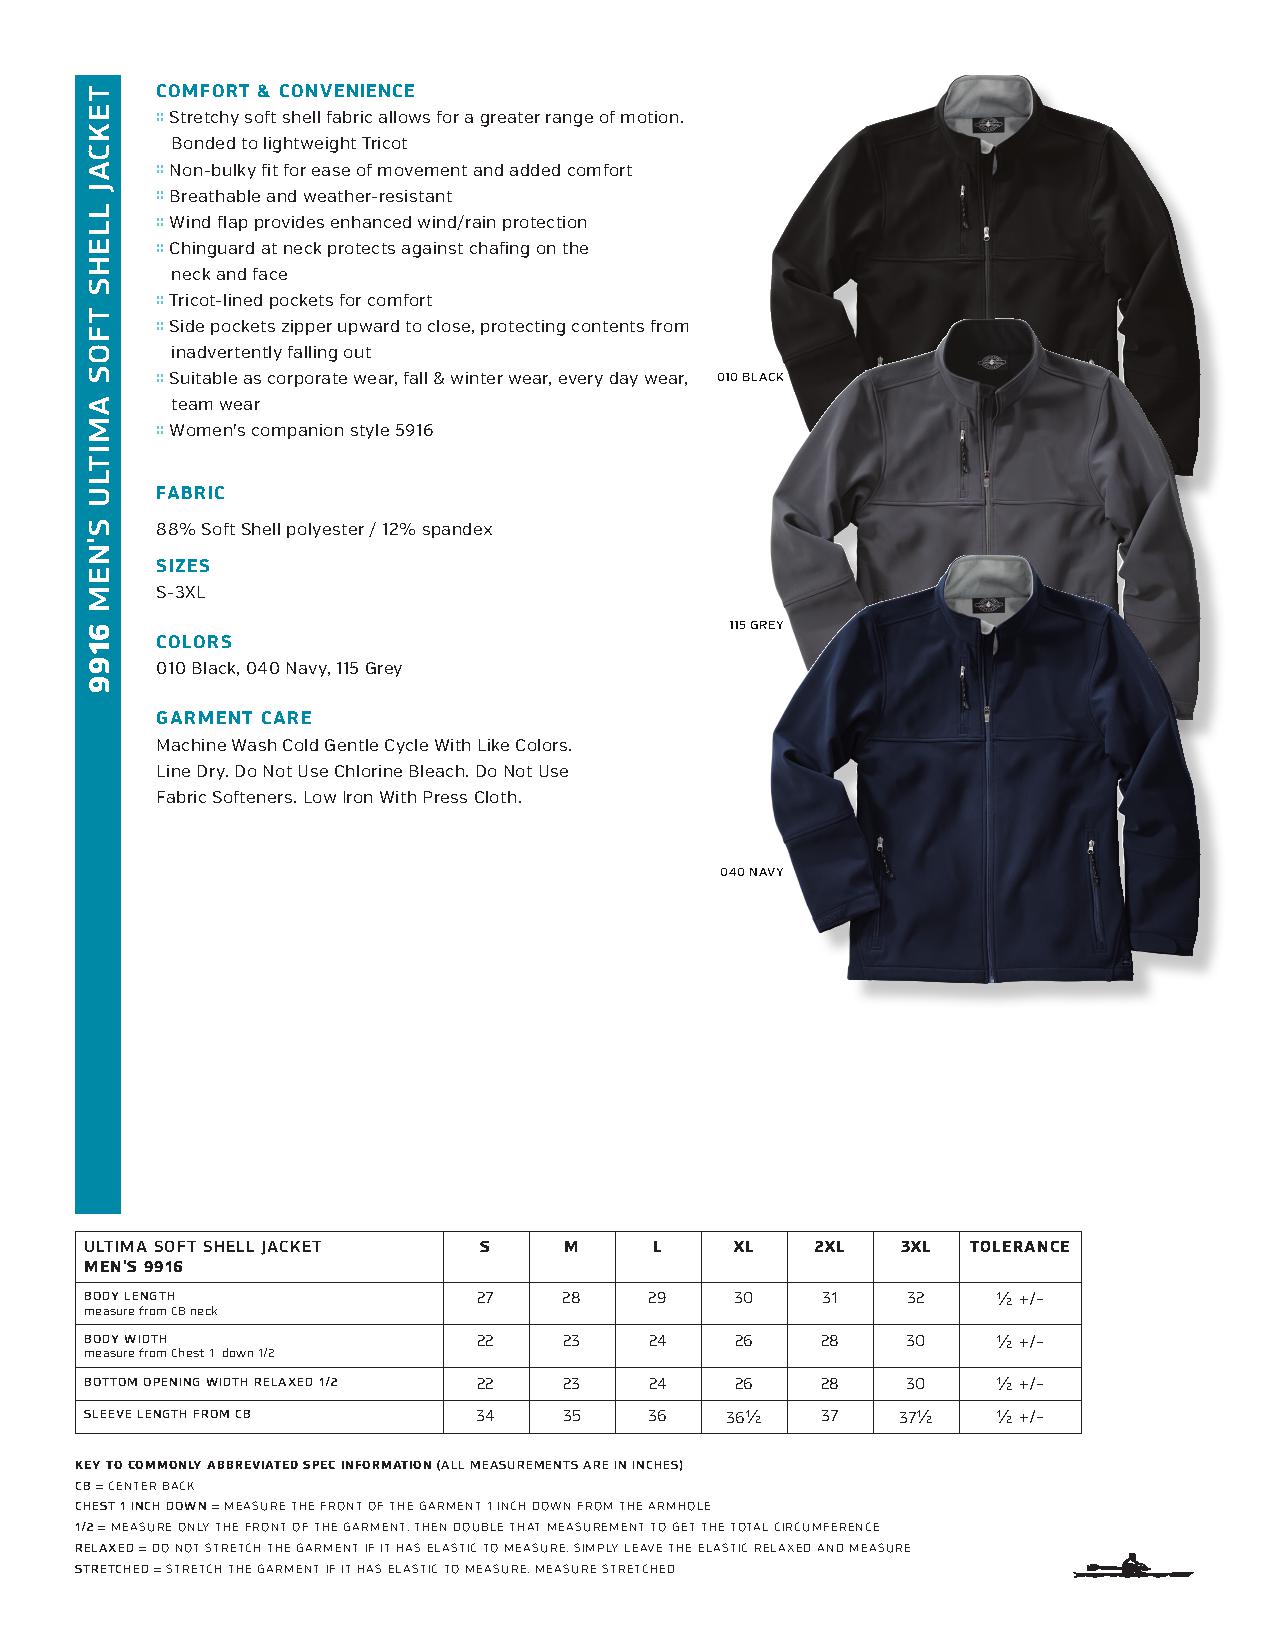 Charles River 9916 - Men's Ultima Soft Shell Jacket $51.30 - Outerwear